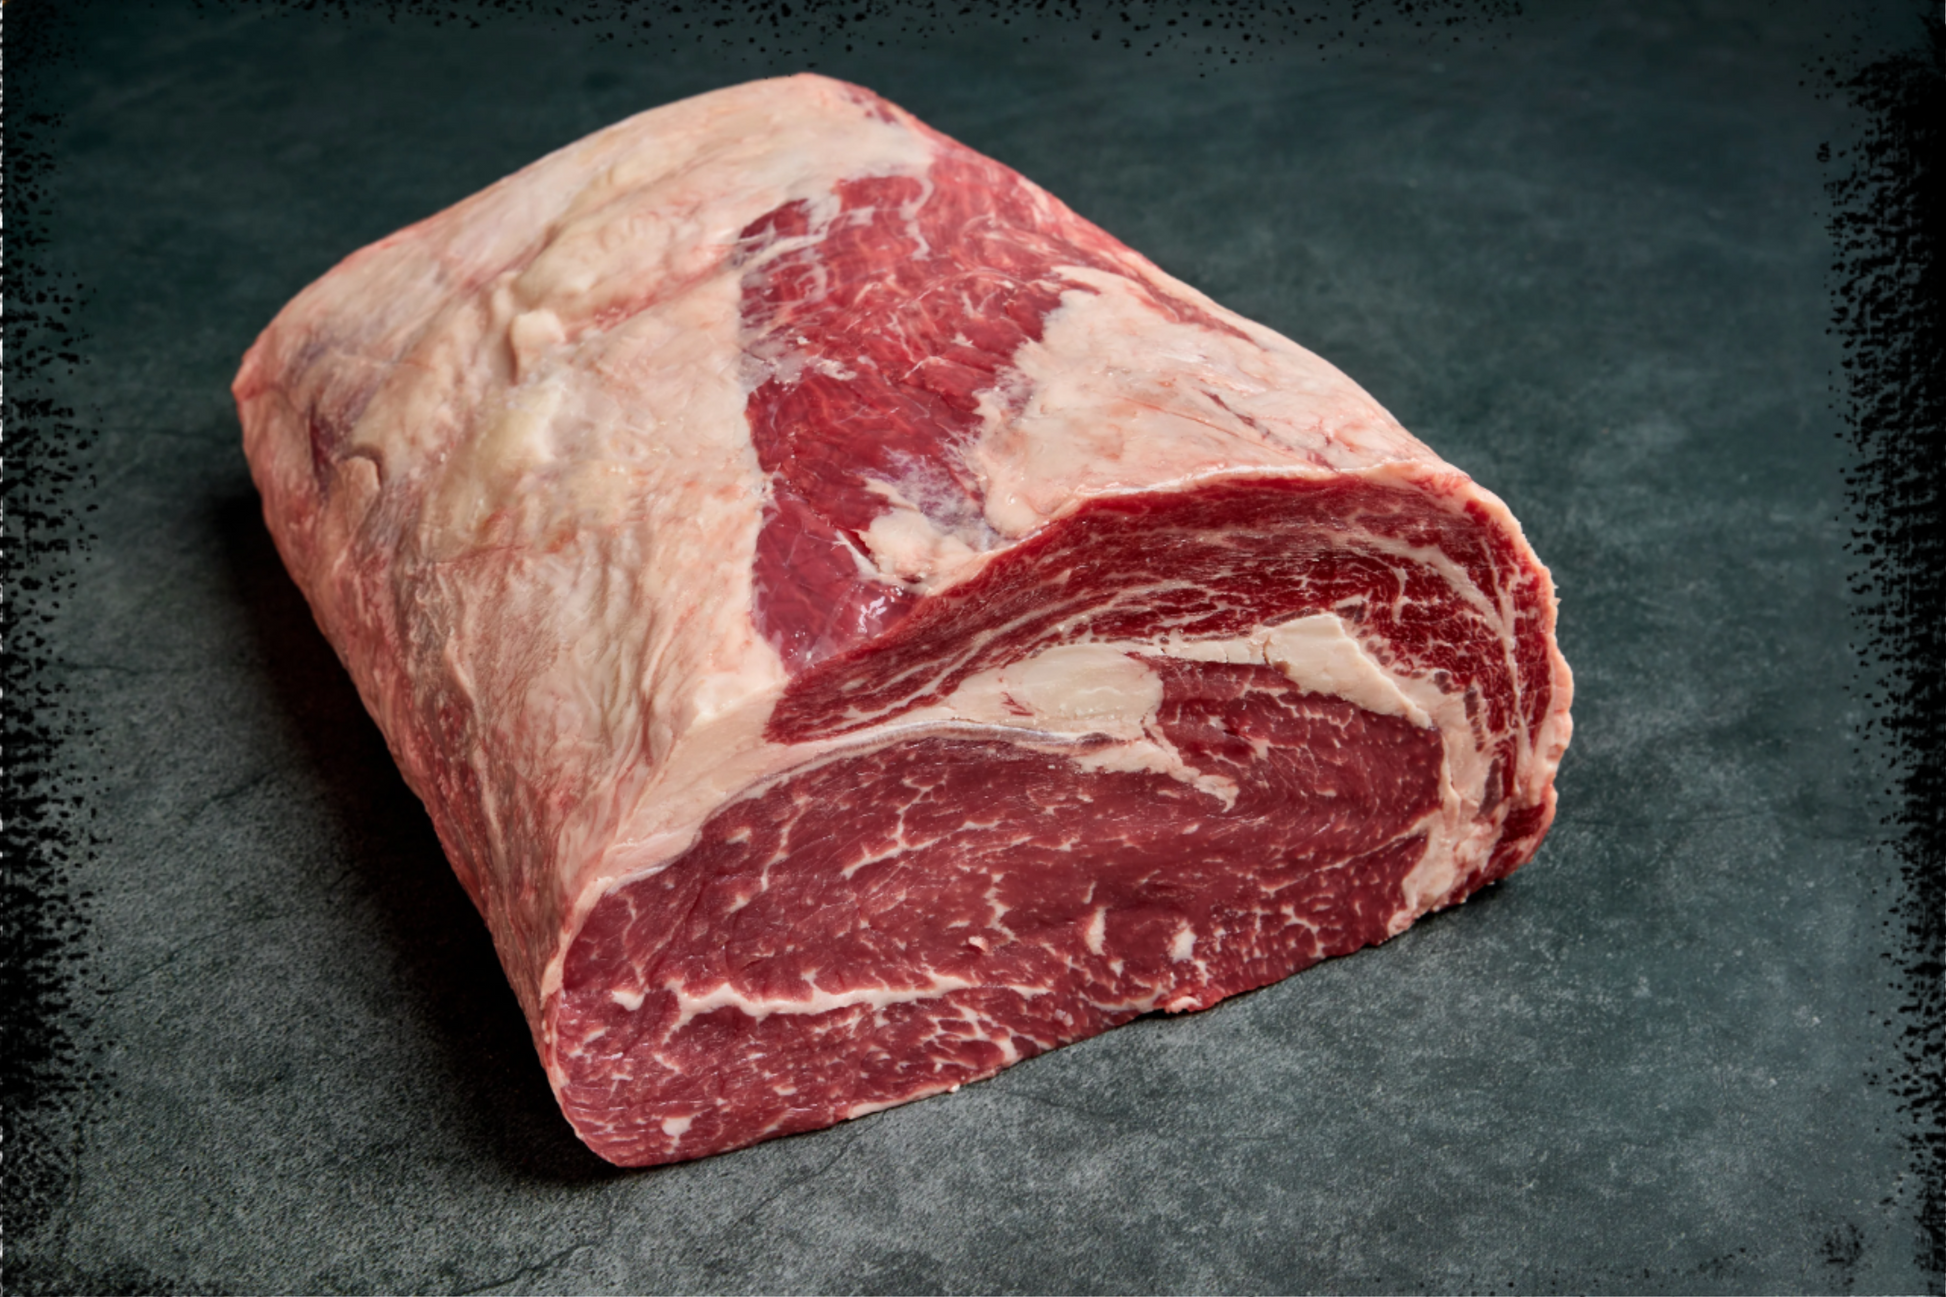 Grass-Fed Beef Ribeye, Brazil (Dhs 35.62/kg) - Chilled